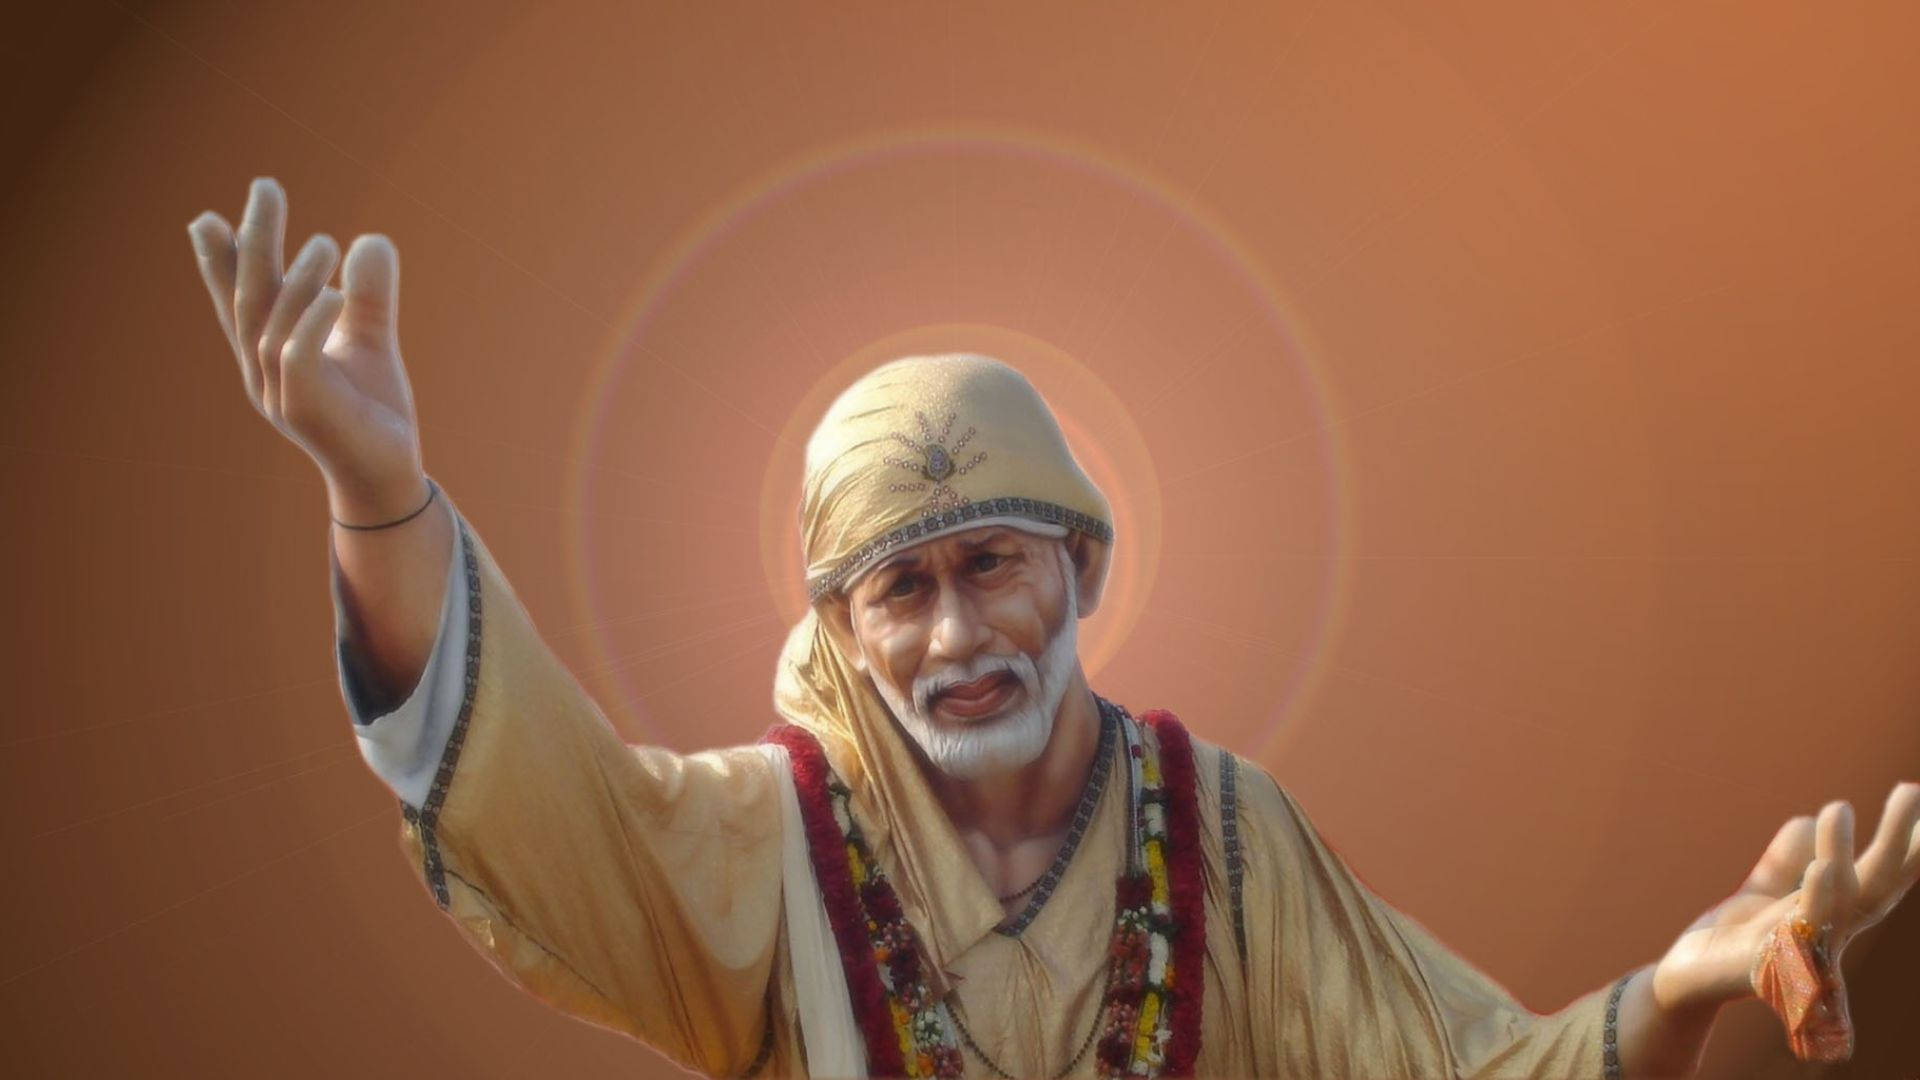 Pin on Sai Baba Hd Images Wallpaper Pictures Photos Free Download